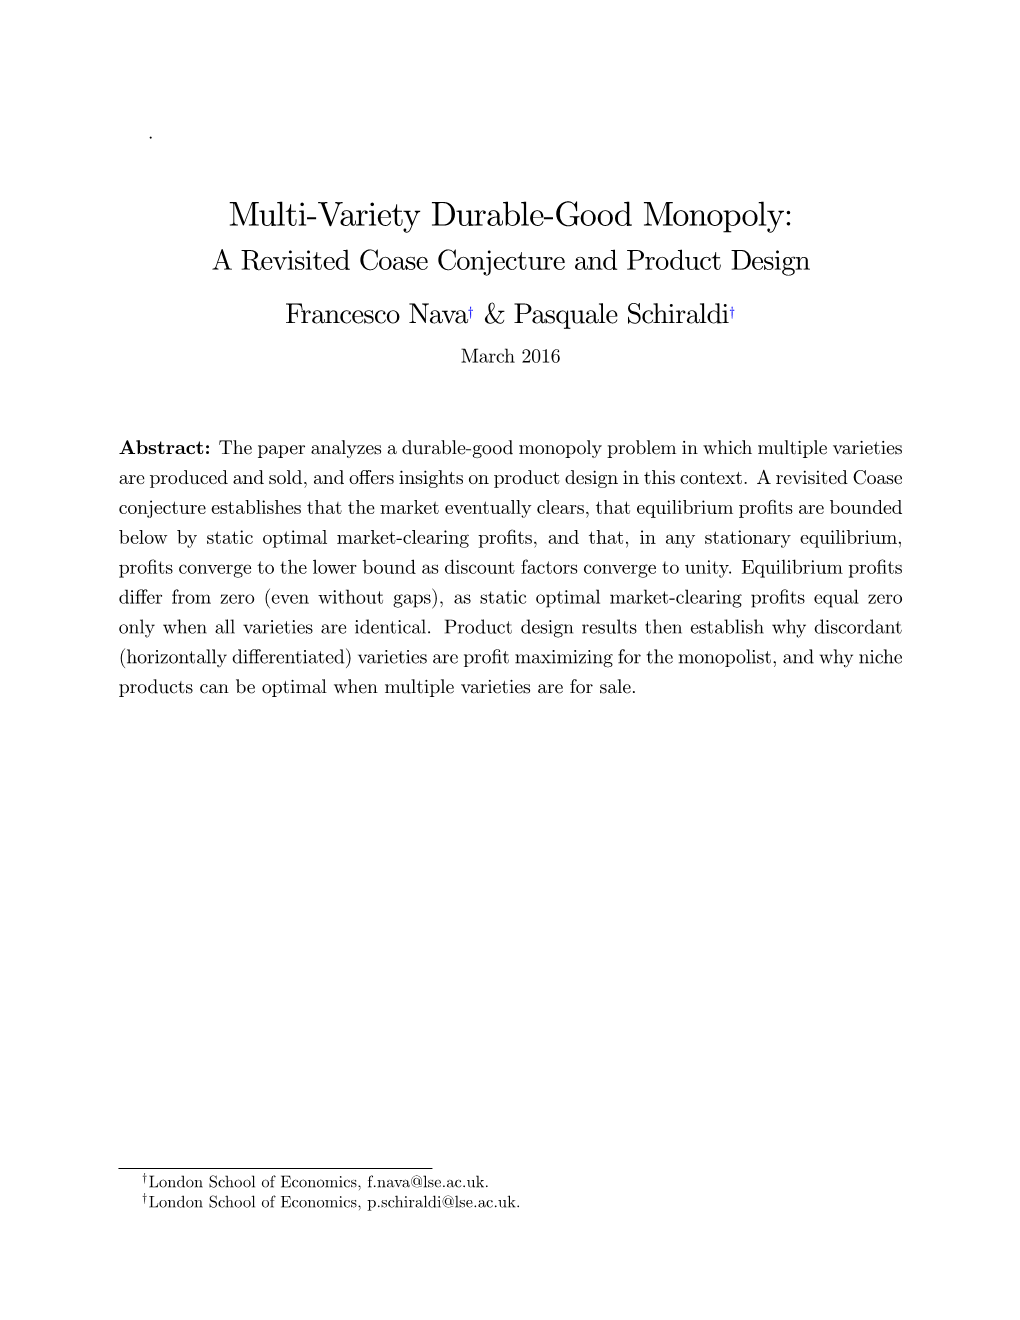 Multi-Variety Durable-Good Monopoly: a Revisited Coase Conjecture and Product Design